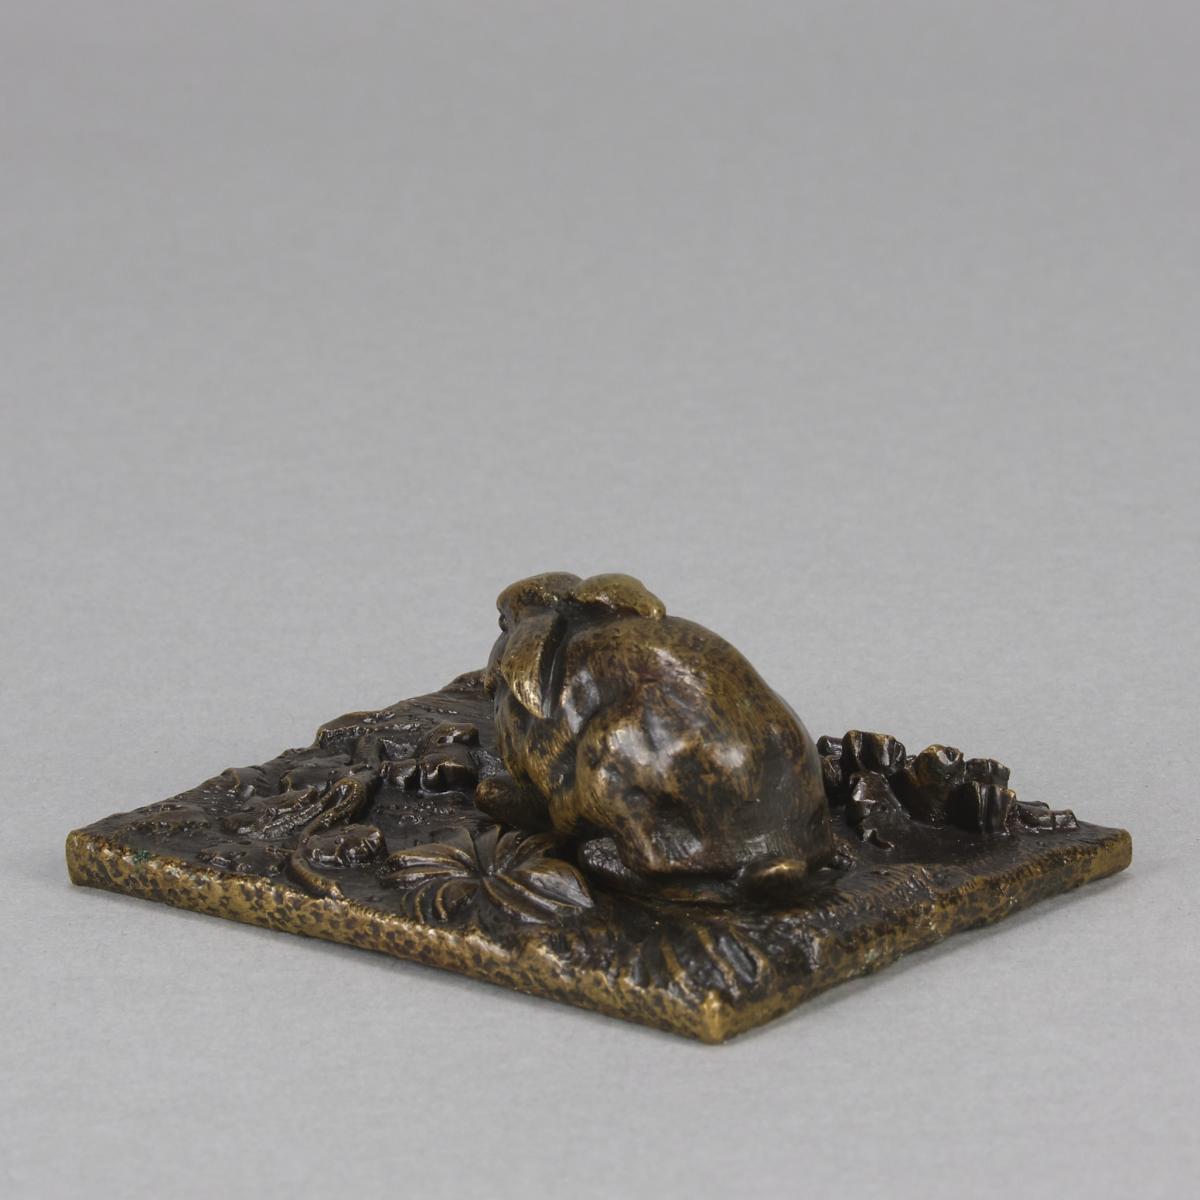 Early 20th Century Animalier French Bronze Sculpture entitled "Seated Rabbit"